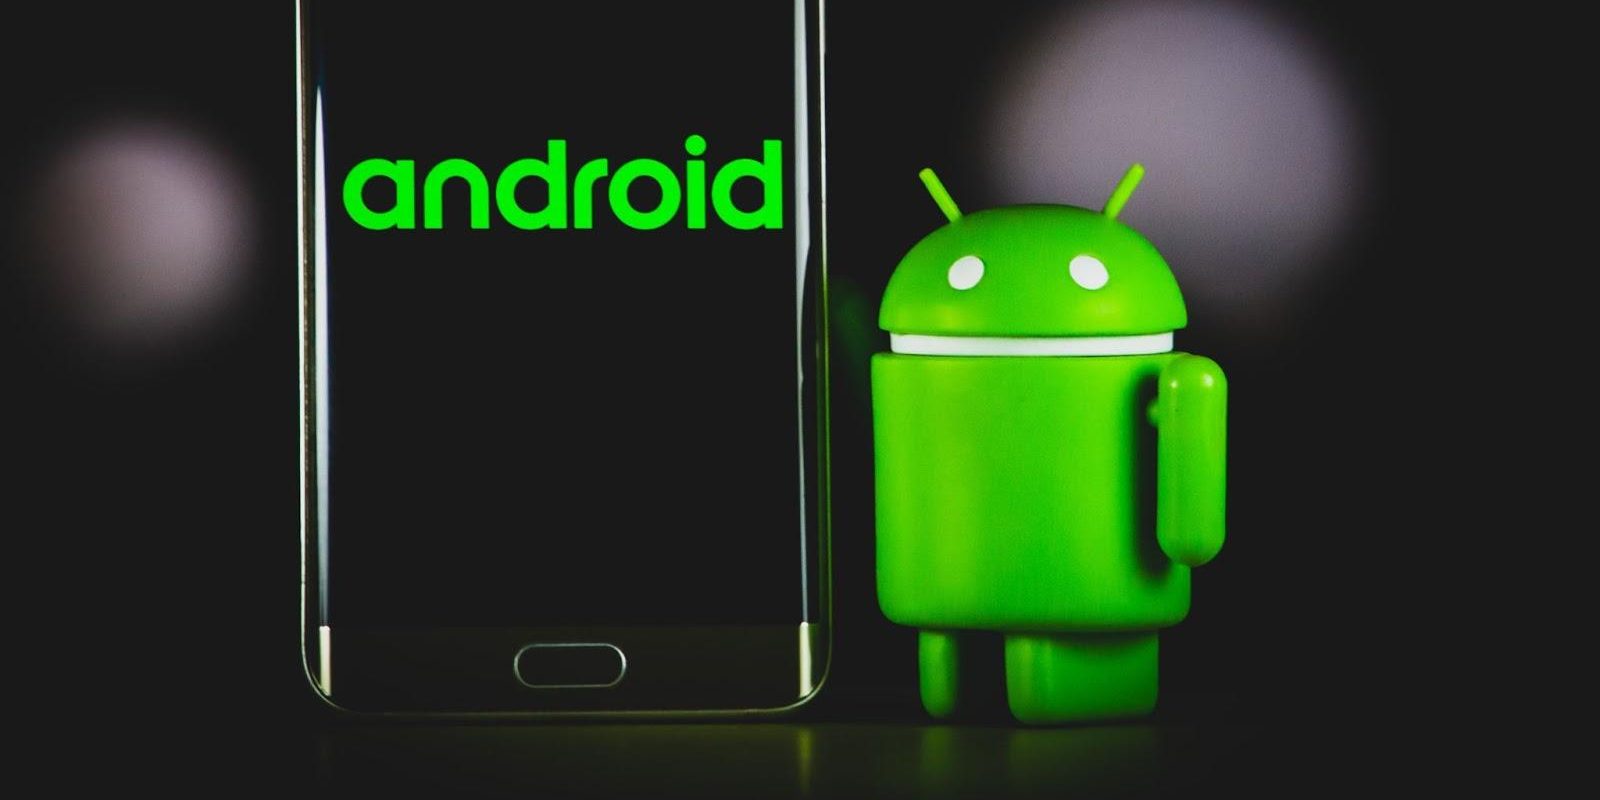 Android Device with Android Avatar